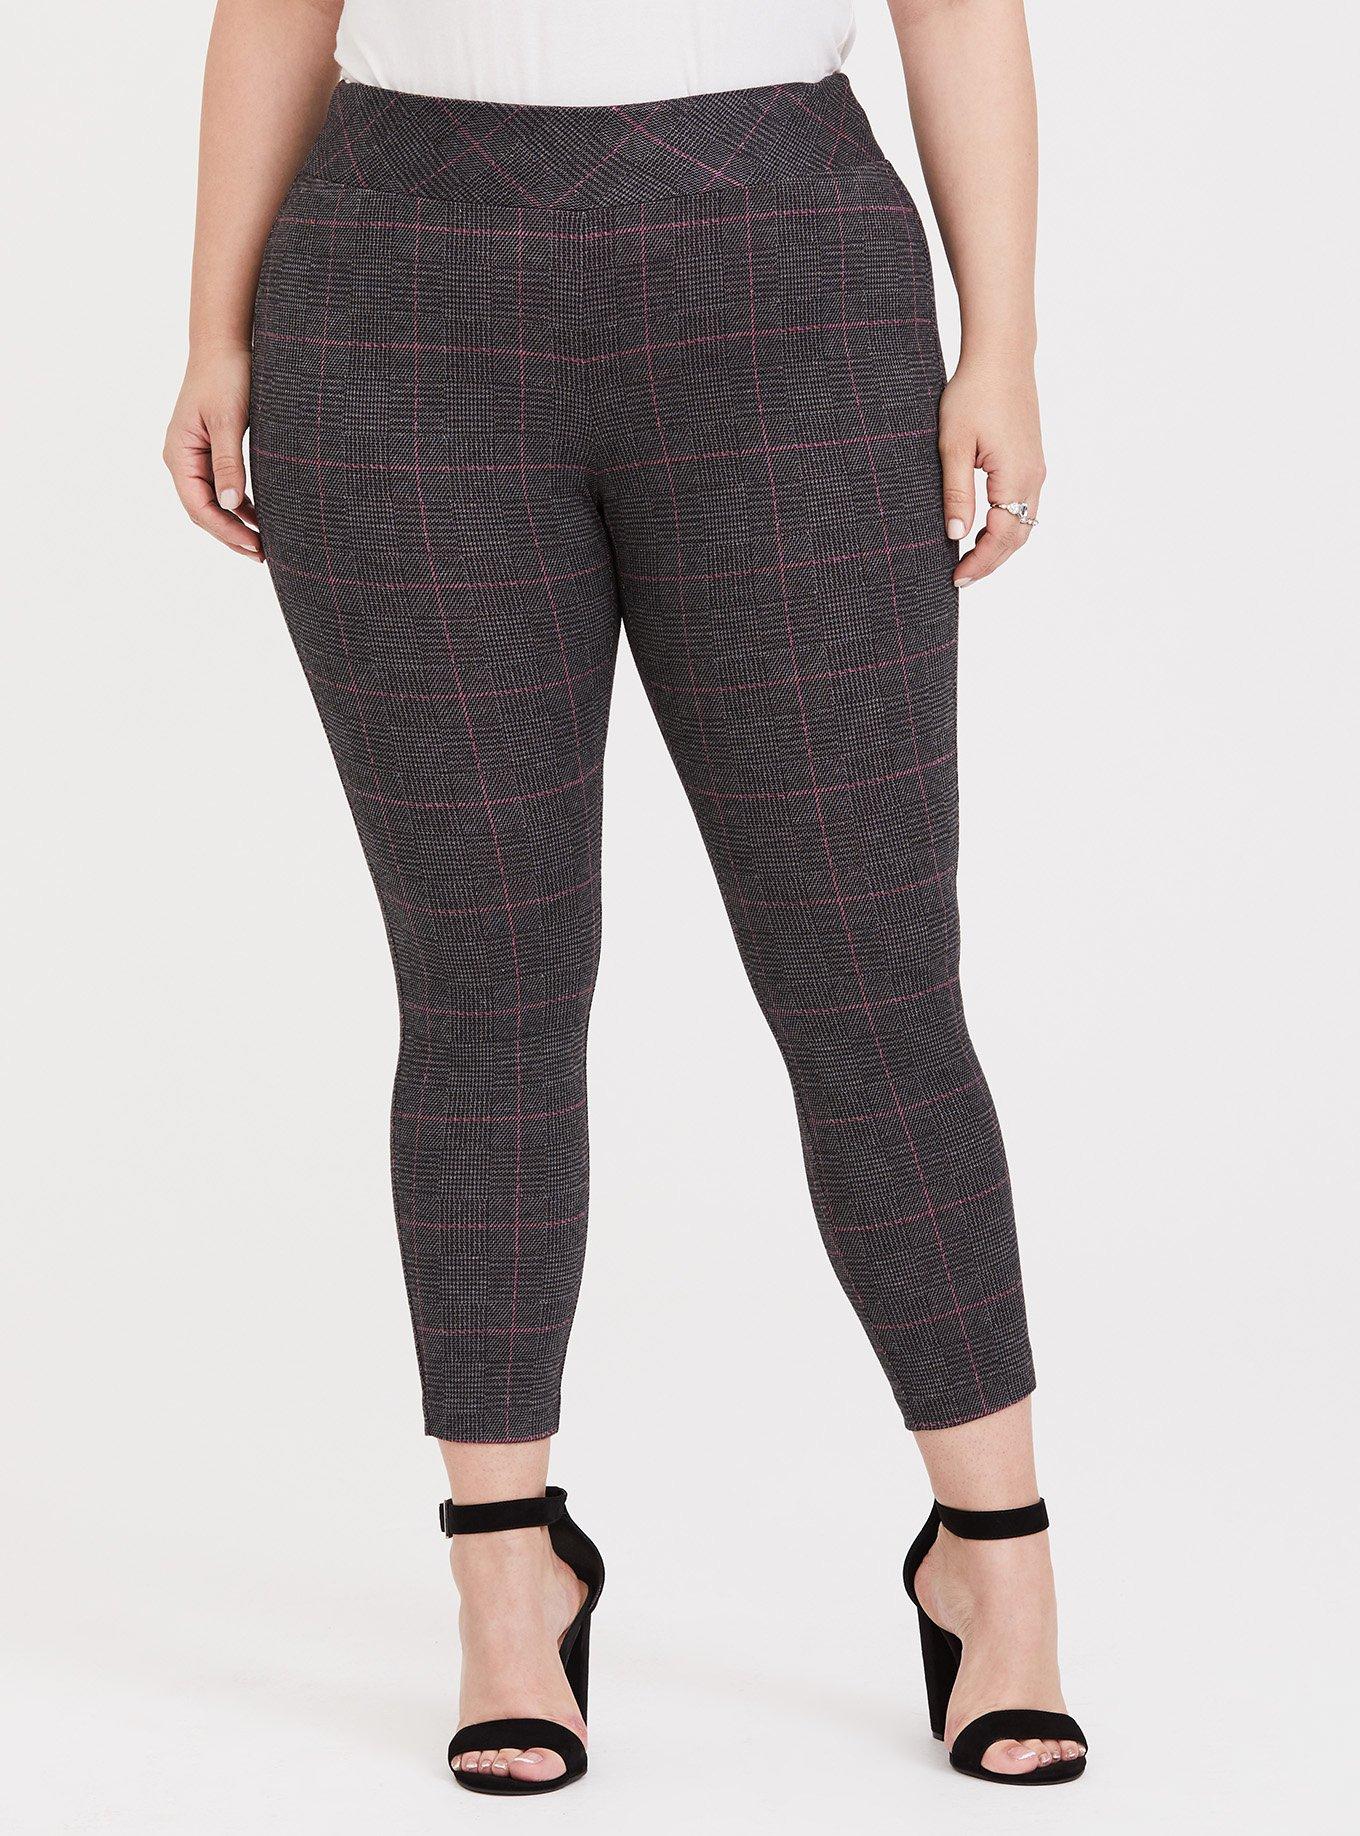 Plus Size - Double Knit Pull-On Pixie Pant - Grey & Pink Plaid - Torrid